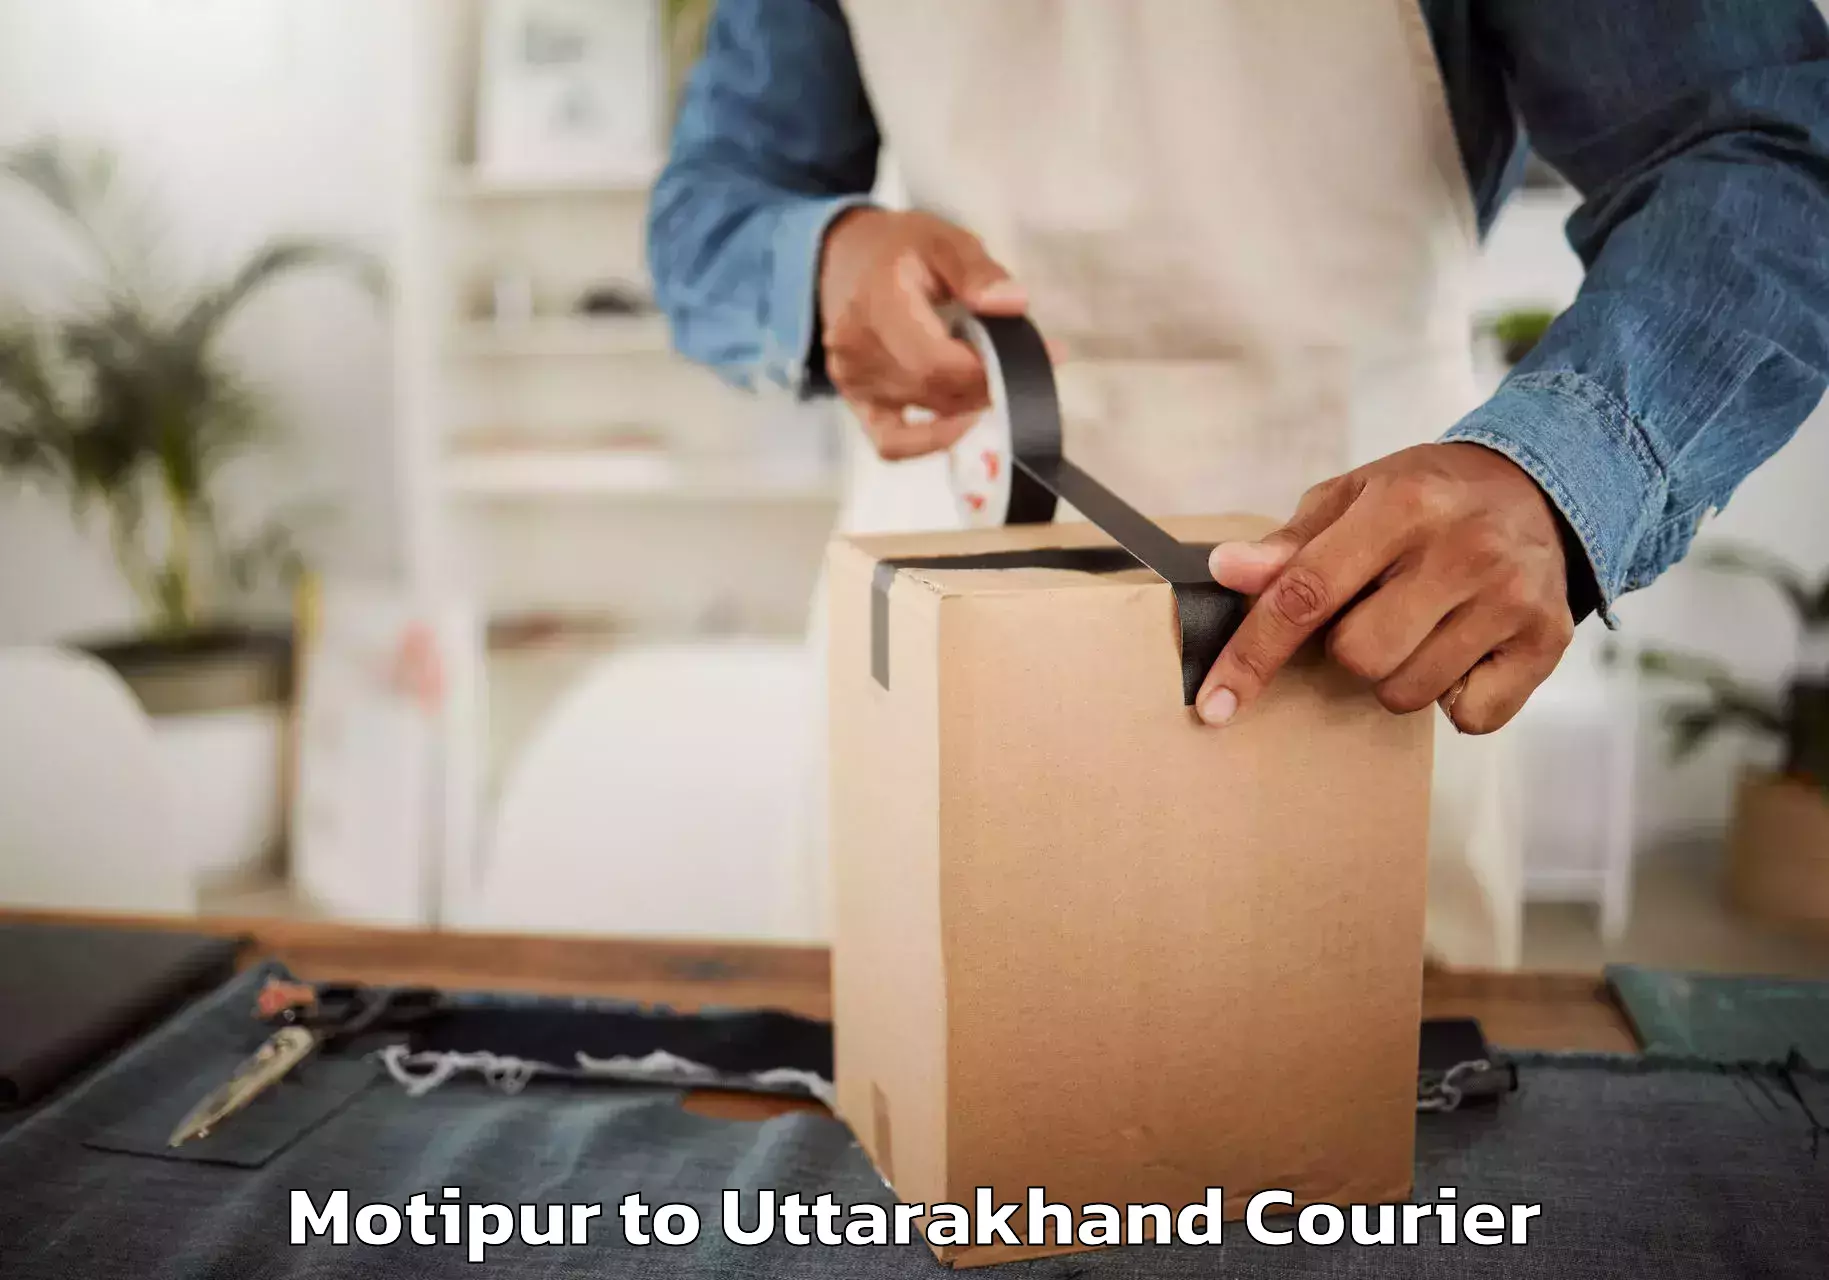 Quality relocation assistance Motipur to Haridwar